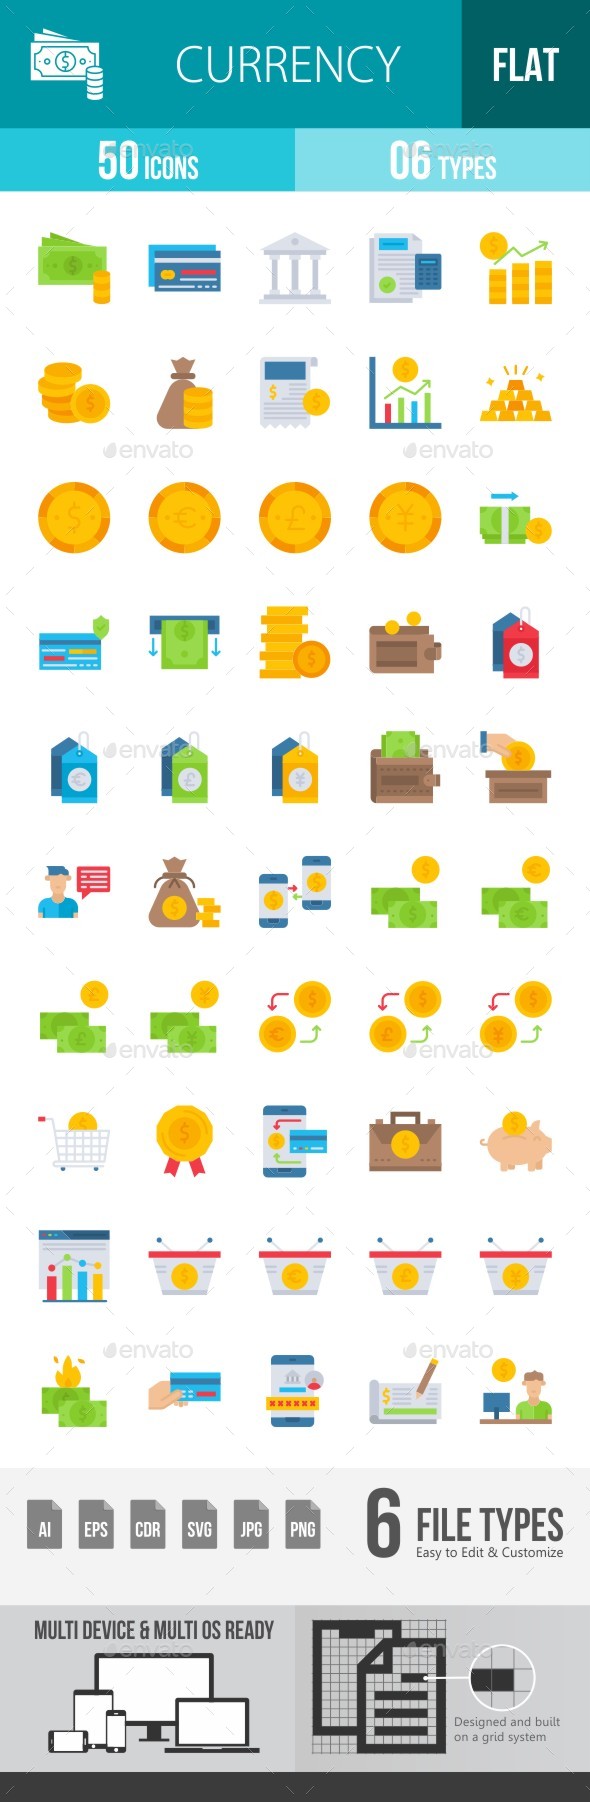 [DOWNLOAD]Currency Flat Multicolor Icons